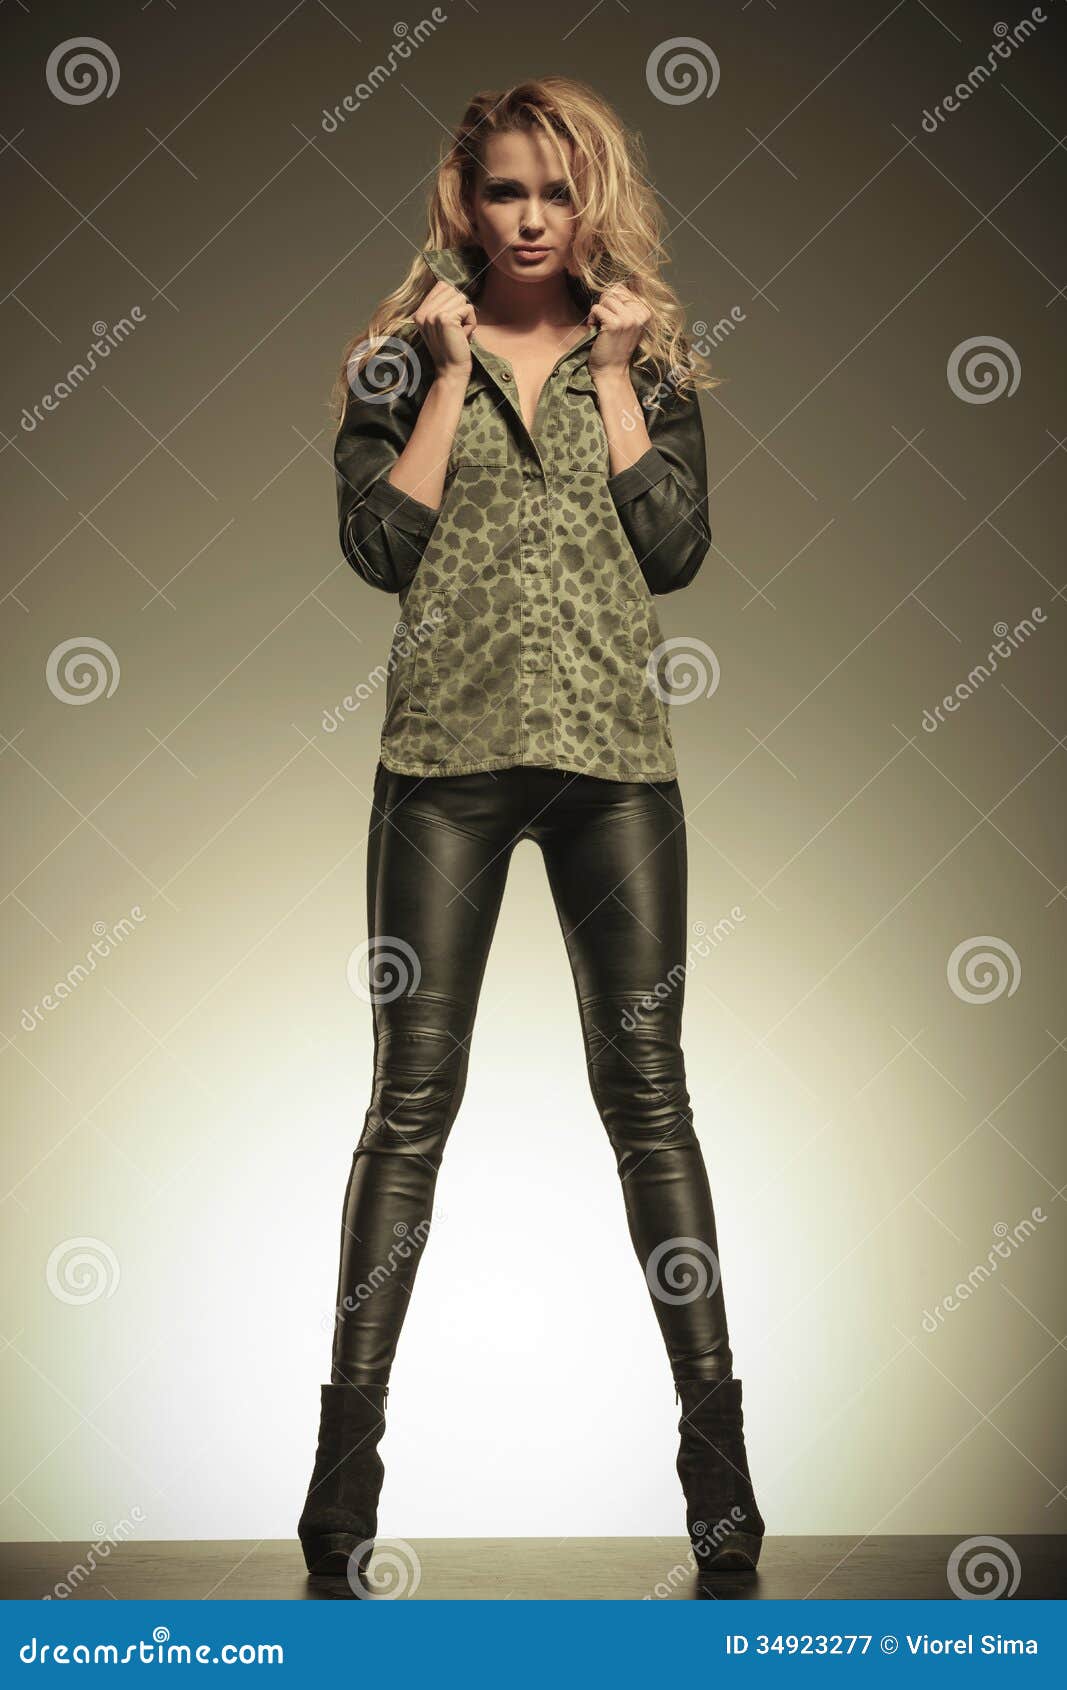 Woman In Leather Pants Posing By Holding Her Collar 